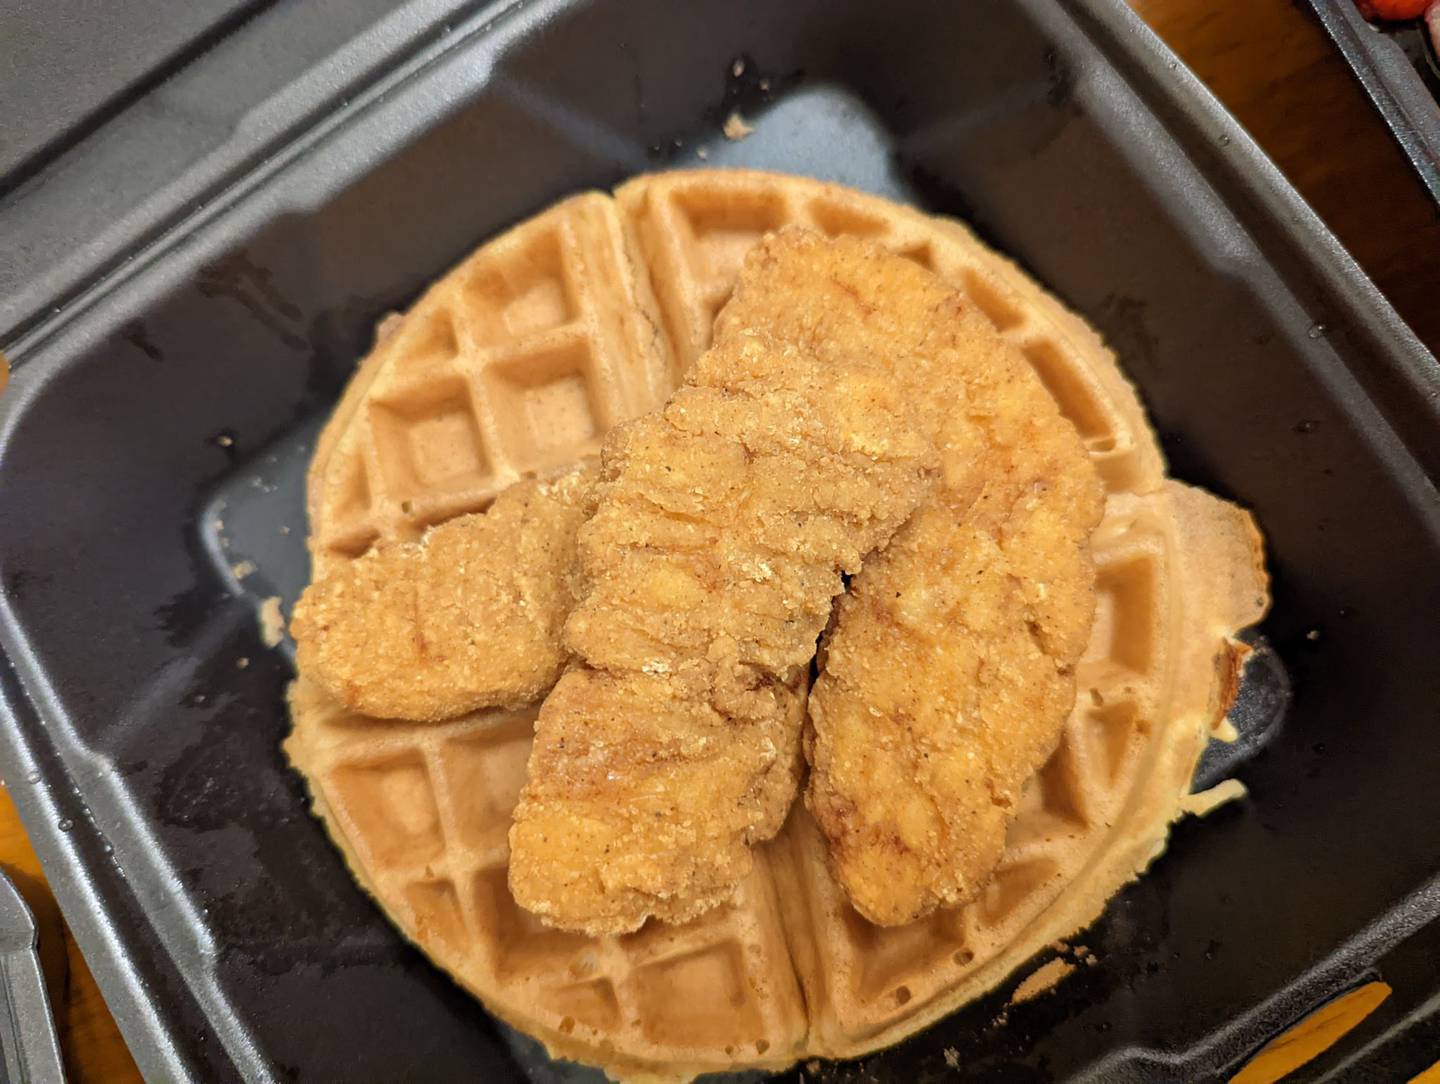 We only saw this chicken waffle from Happy Place Cafe in Shorewood available on its online menu. But I'm happy we found it. The photo looks plain, but the flavors of both the waffle and chicken were outstanding made a heavenly combination.